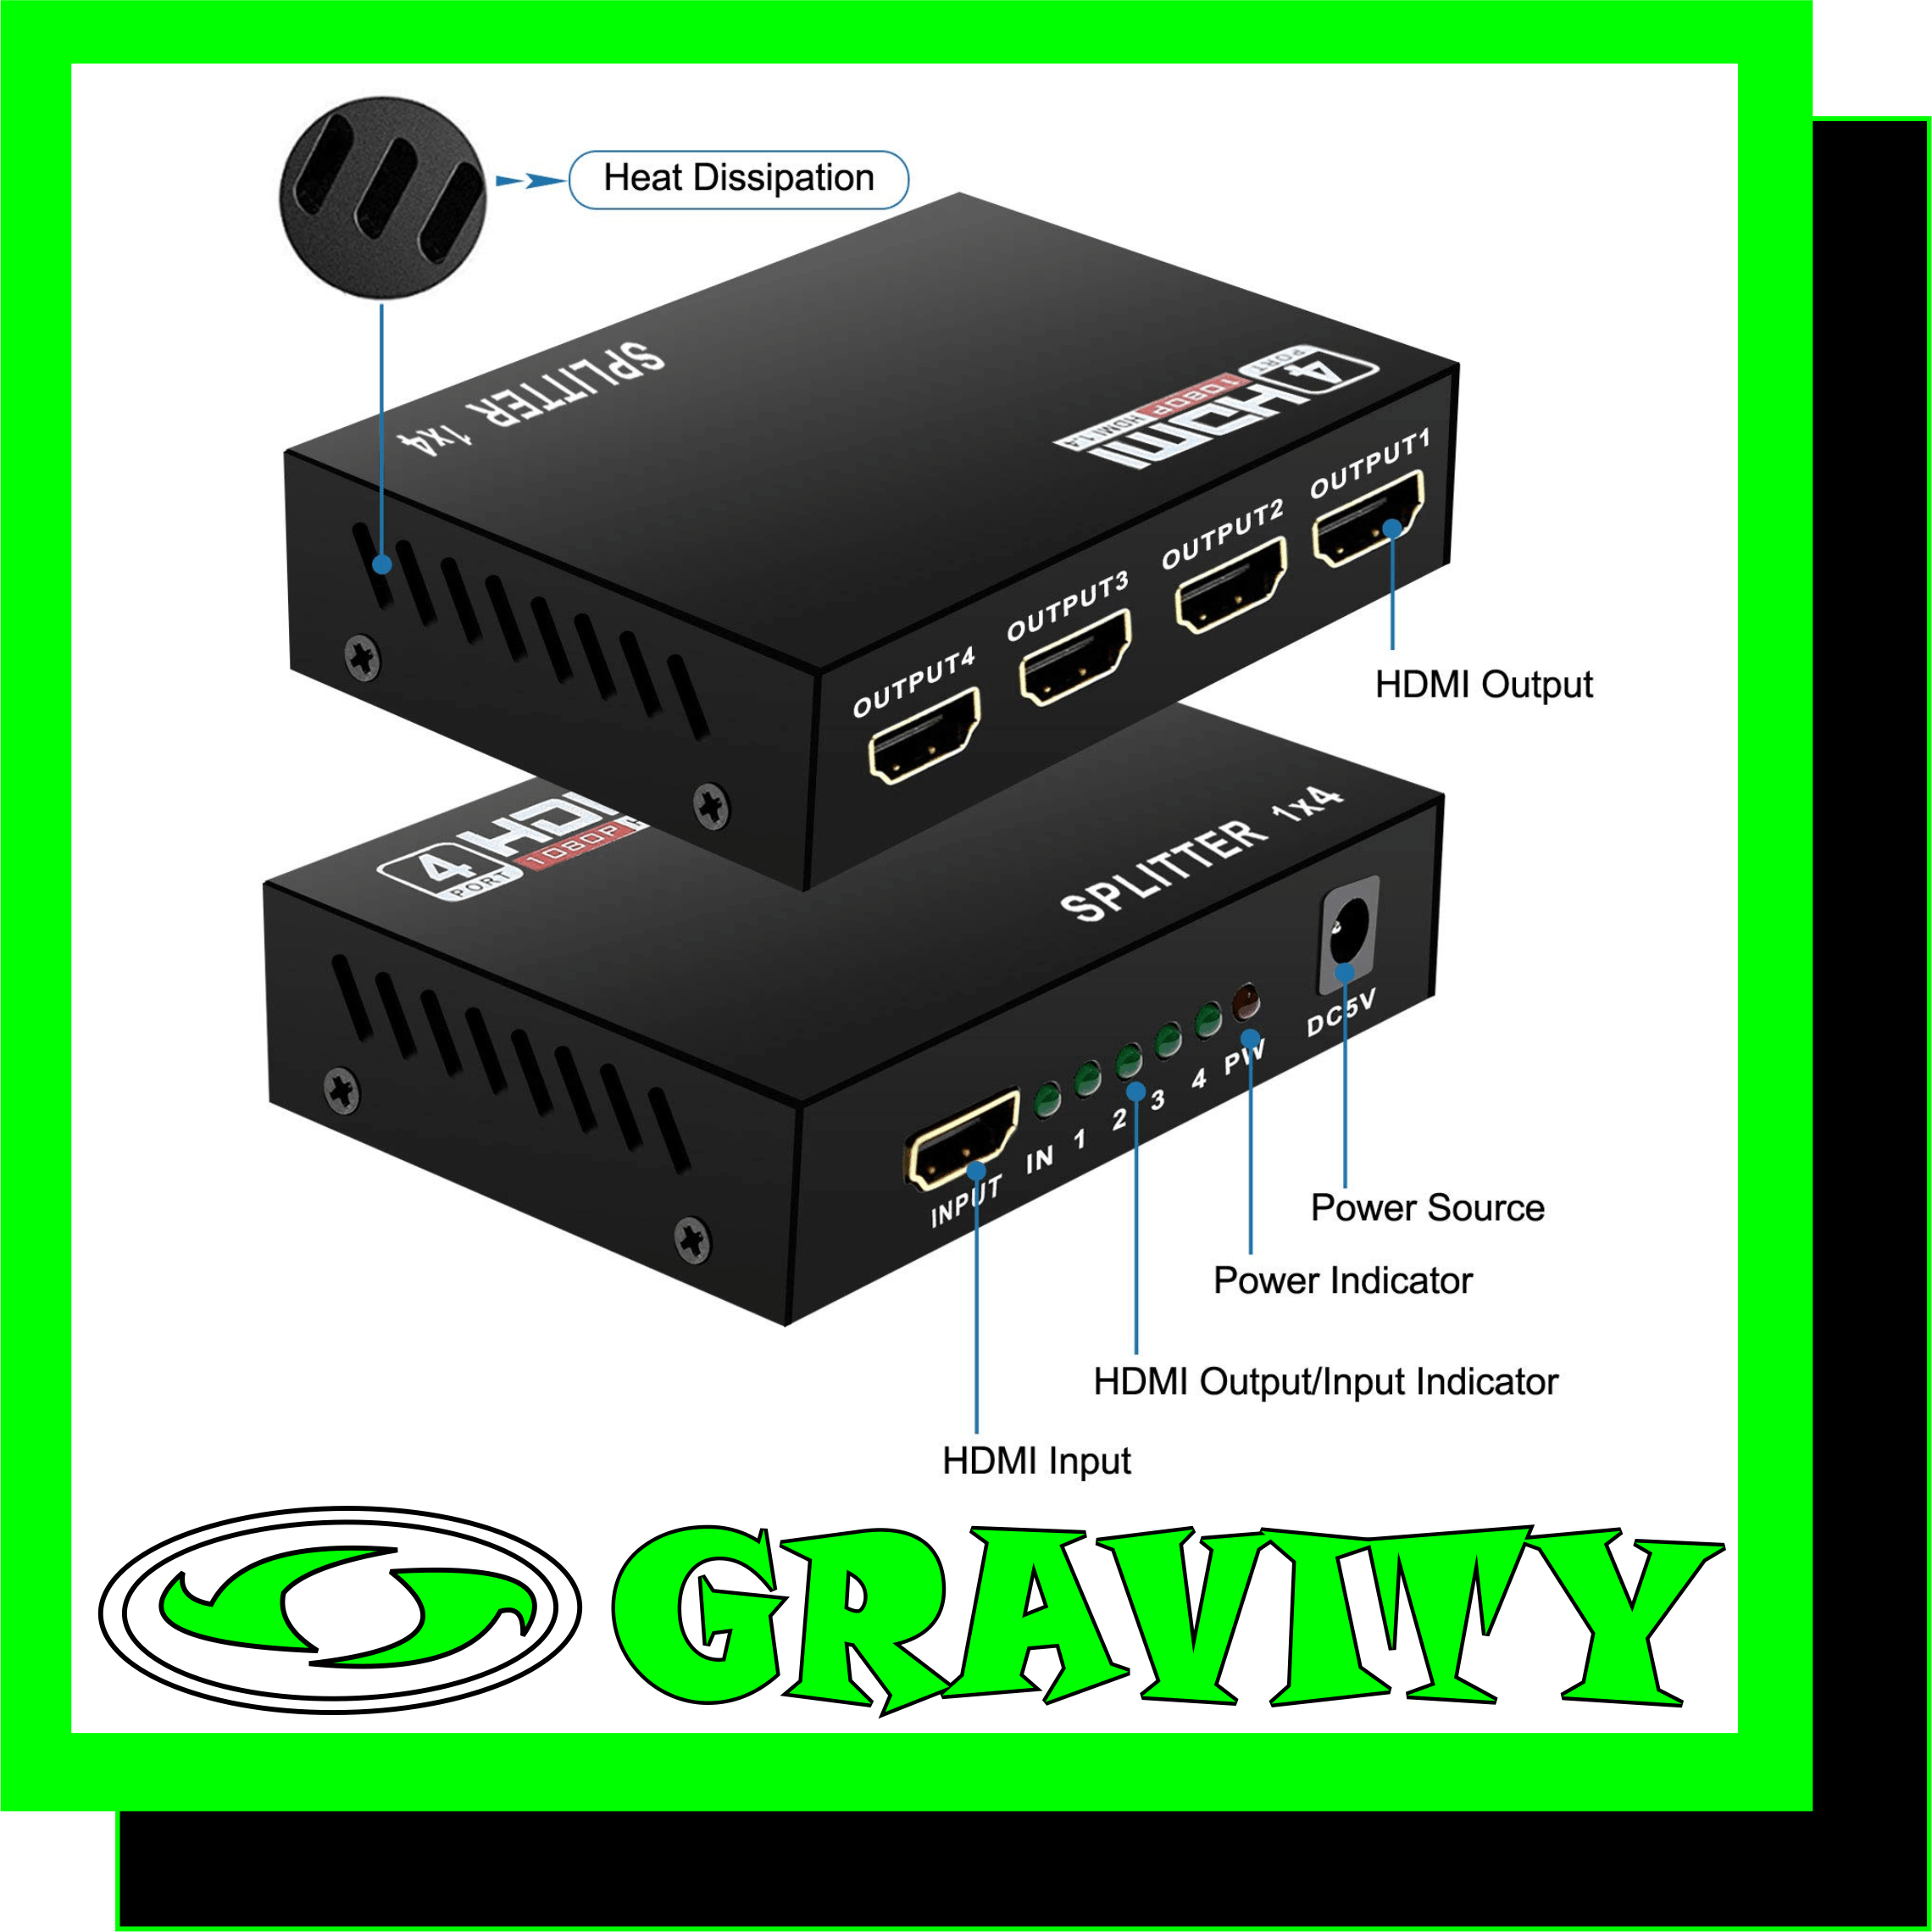 HDMI Splitter,Vicspot 1x4 Ports Video Converter 1 in 4 Out Full HD 1080P Amplifier 4K/2K and 3D Resolutions Metal Box with Ultra Powered V1.4b (1 Input to 4 Outputs)  Feature:  1.Simple to use, no need to install drivers, portable, flexible, plug and play.  2.Multi-format input, Support PAL, NTSC3.58, NTSC4.43, SECAM, PAL/M, PAL/N standard TV formats input.  3.Excellent visual experience , full HD ,support 3D ,4K,provide you good visual experience.  4.HD, can be displayed on monitor/ TV with 1920x1080(60Hz) High bandwidth capability 5.Portable , mini size ,save space ,easy to move.  6.WIDE APPLICATION: Shopping mall super market,data control center, information distribution, corporation show room, home theater.   Specifications:  1. Input ports: 1X HDMI port 2. Output ports: 4 X HDMI ports (standard)  3. Input video signal: 0.5-1.0 volts p-p 4. Input DDC signal: 5 volts p-p (TTL)  5. Video format supported:640x480,800x600,1024x768,1280x1024,3840x2160  6. HDMI resolution: 408i/480p/576i/576p/720p/1080i/1080p/4K 7.Max single link range: 3820 X 2160 8. Dimensions (inch): 3.8’’x2.4’’x0.8’’  9. Output Video: HDMI+HDCP1.0/1.1/1.2/1.2a/1.3/1.4 10. EDID duration: 4 seconds 11.Vertical Frequency Range:30Hz/60Hz/85Hz 11.Power Supply: DC 5V@1A 12.. Weight (g): 112g